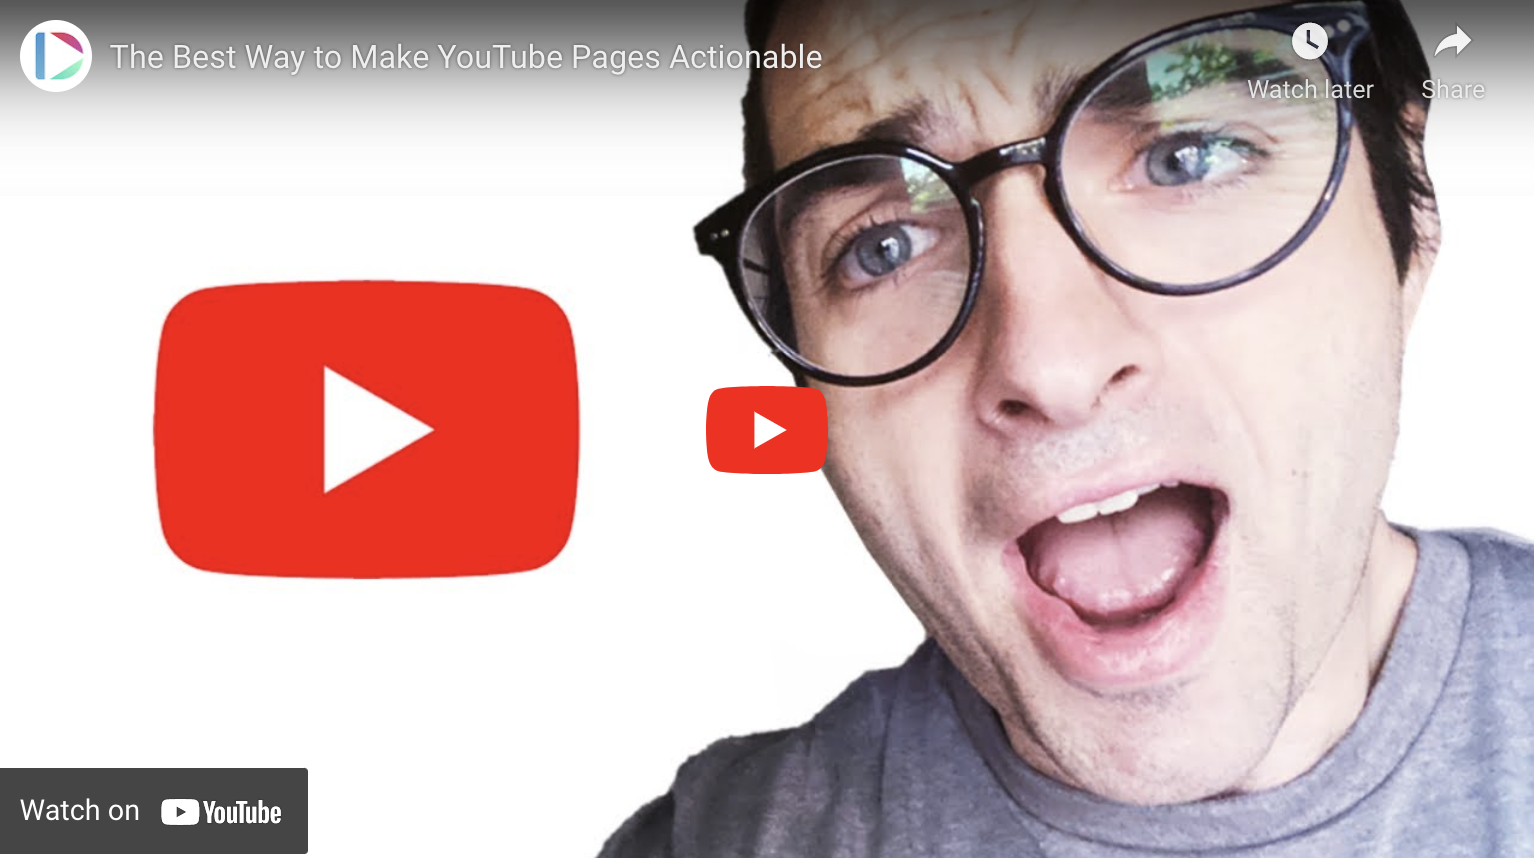 The Best Way to Make YouTube Pages Actionable